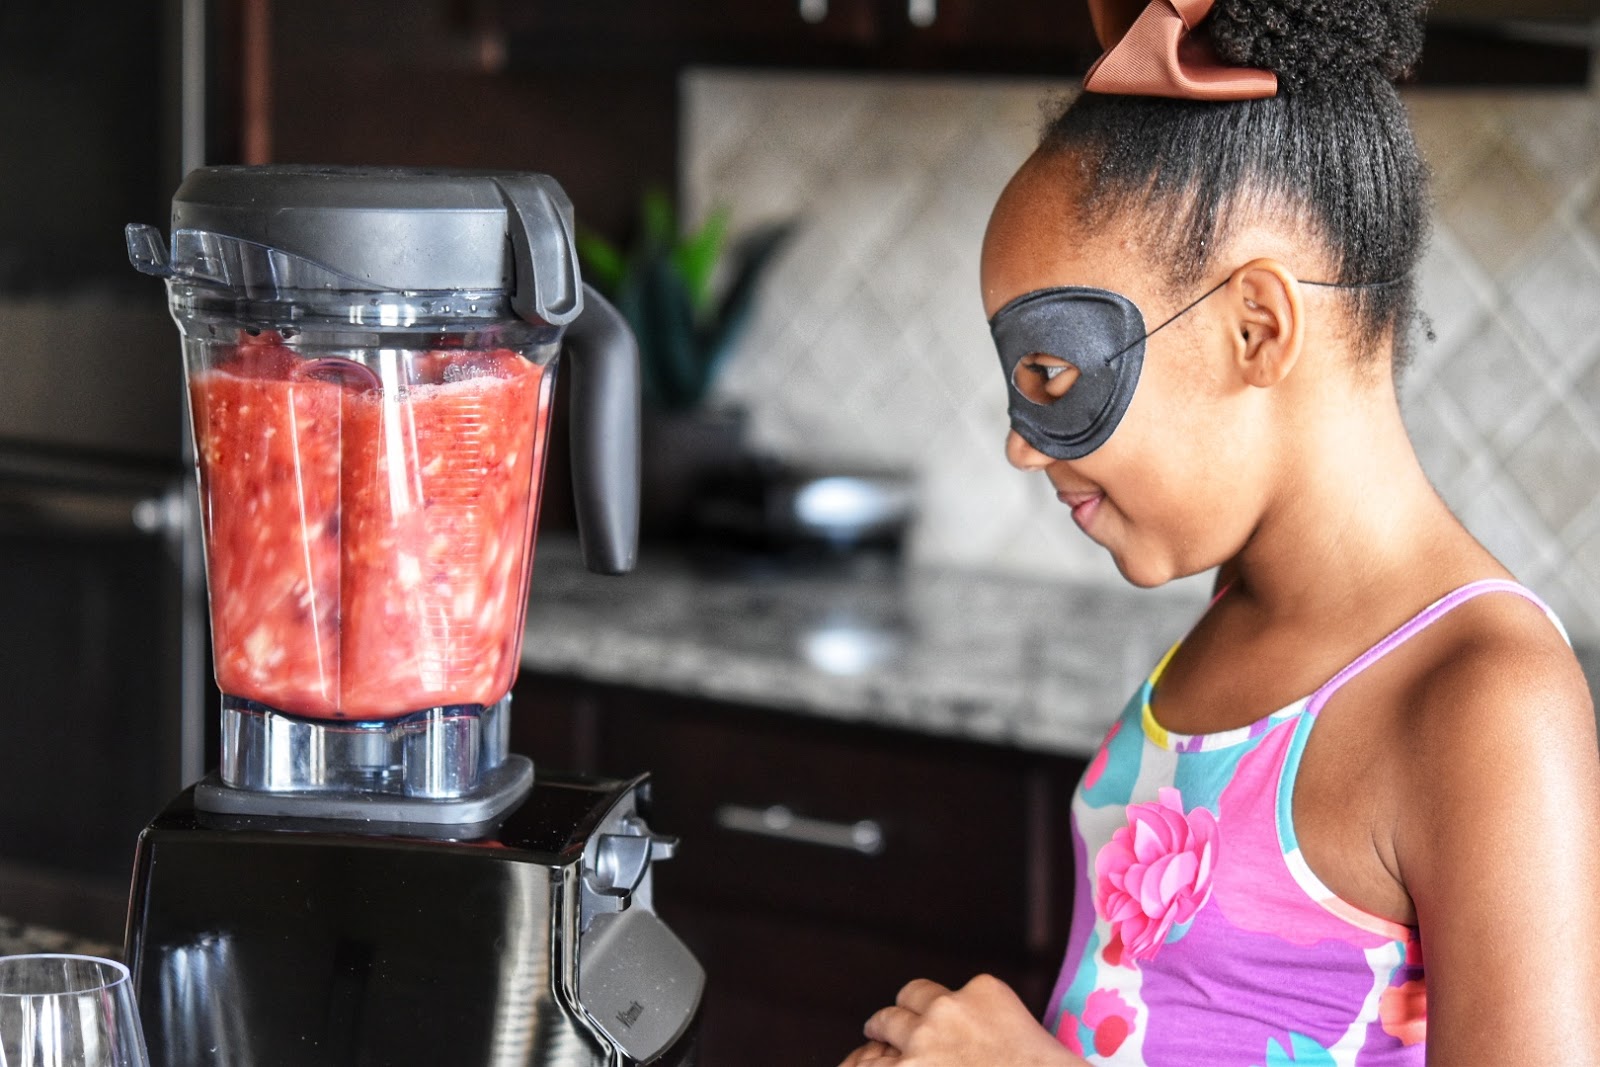 Mission: Incredibles 2 Inspired Smoothie Drink with Juicy Juice  via  www.productreviewmom.com